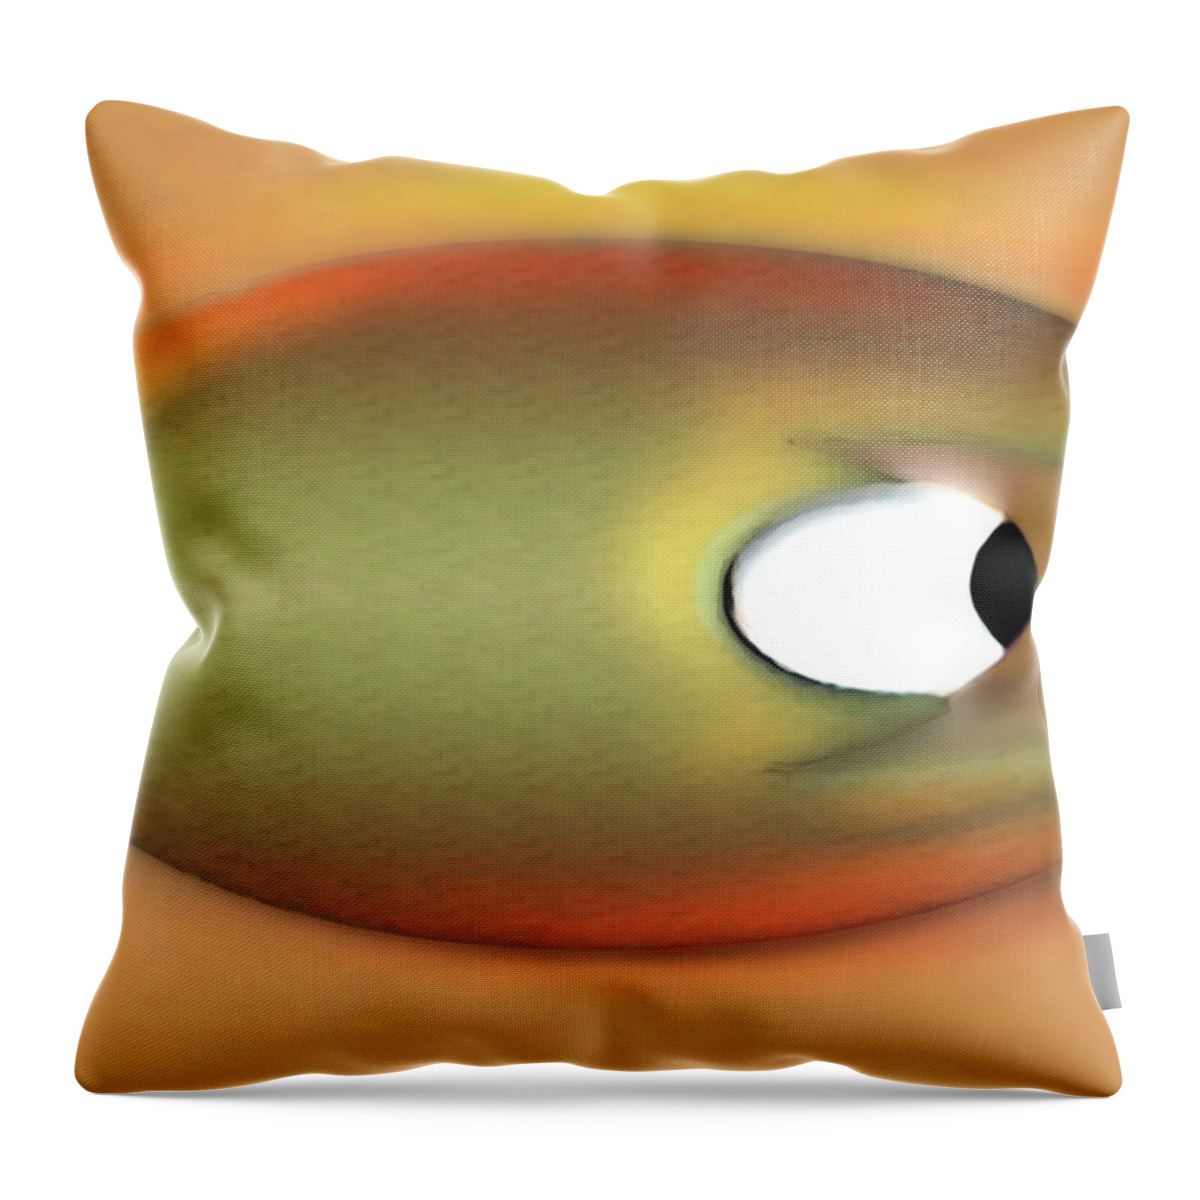 Digital Art Throw Pillow featuring the drawing Sunny Eagerman by Luc Van de Steeg